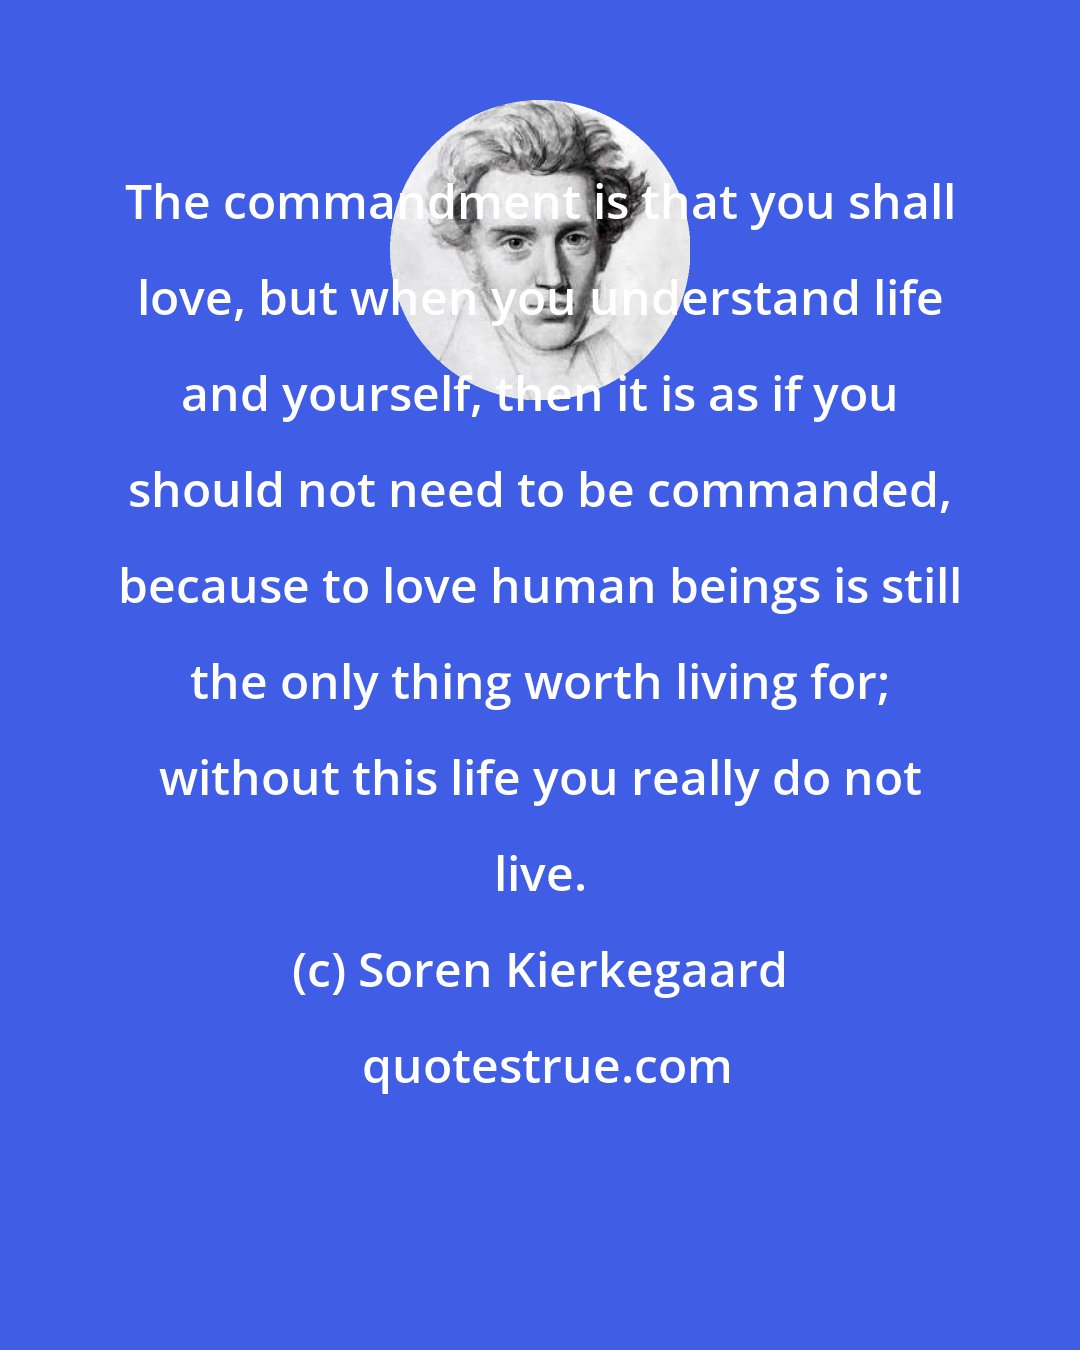 Soren Kierkegaard: The commandment is that you shall love, but when you understand life and yourself, then it is as if you should not need to be commanded, because to love human beings is still the only thing worth living for; without this life you really do not live.